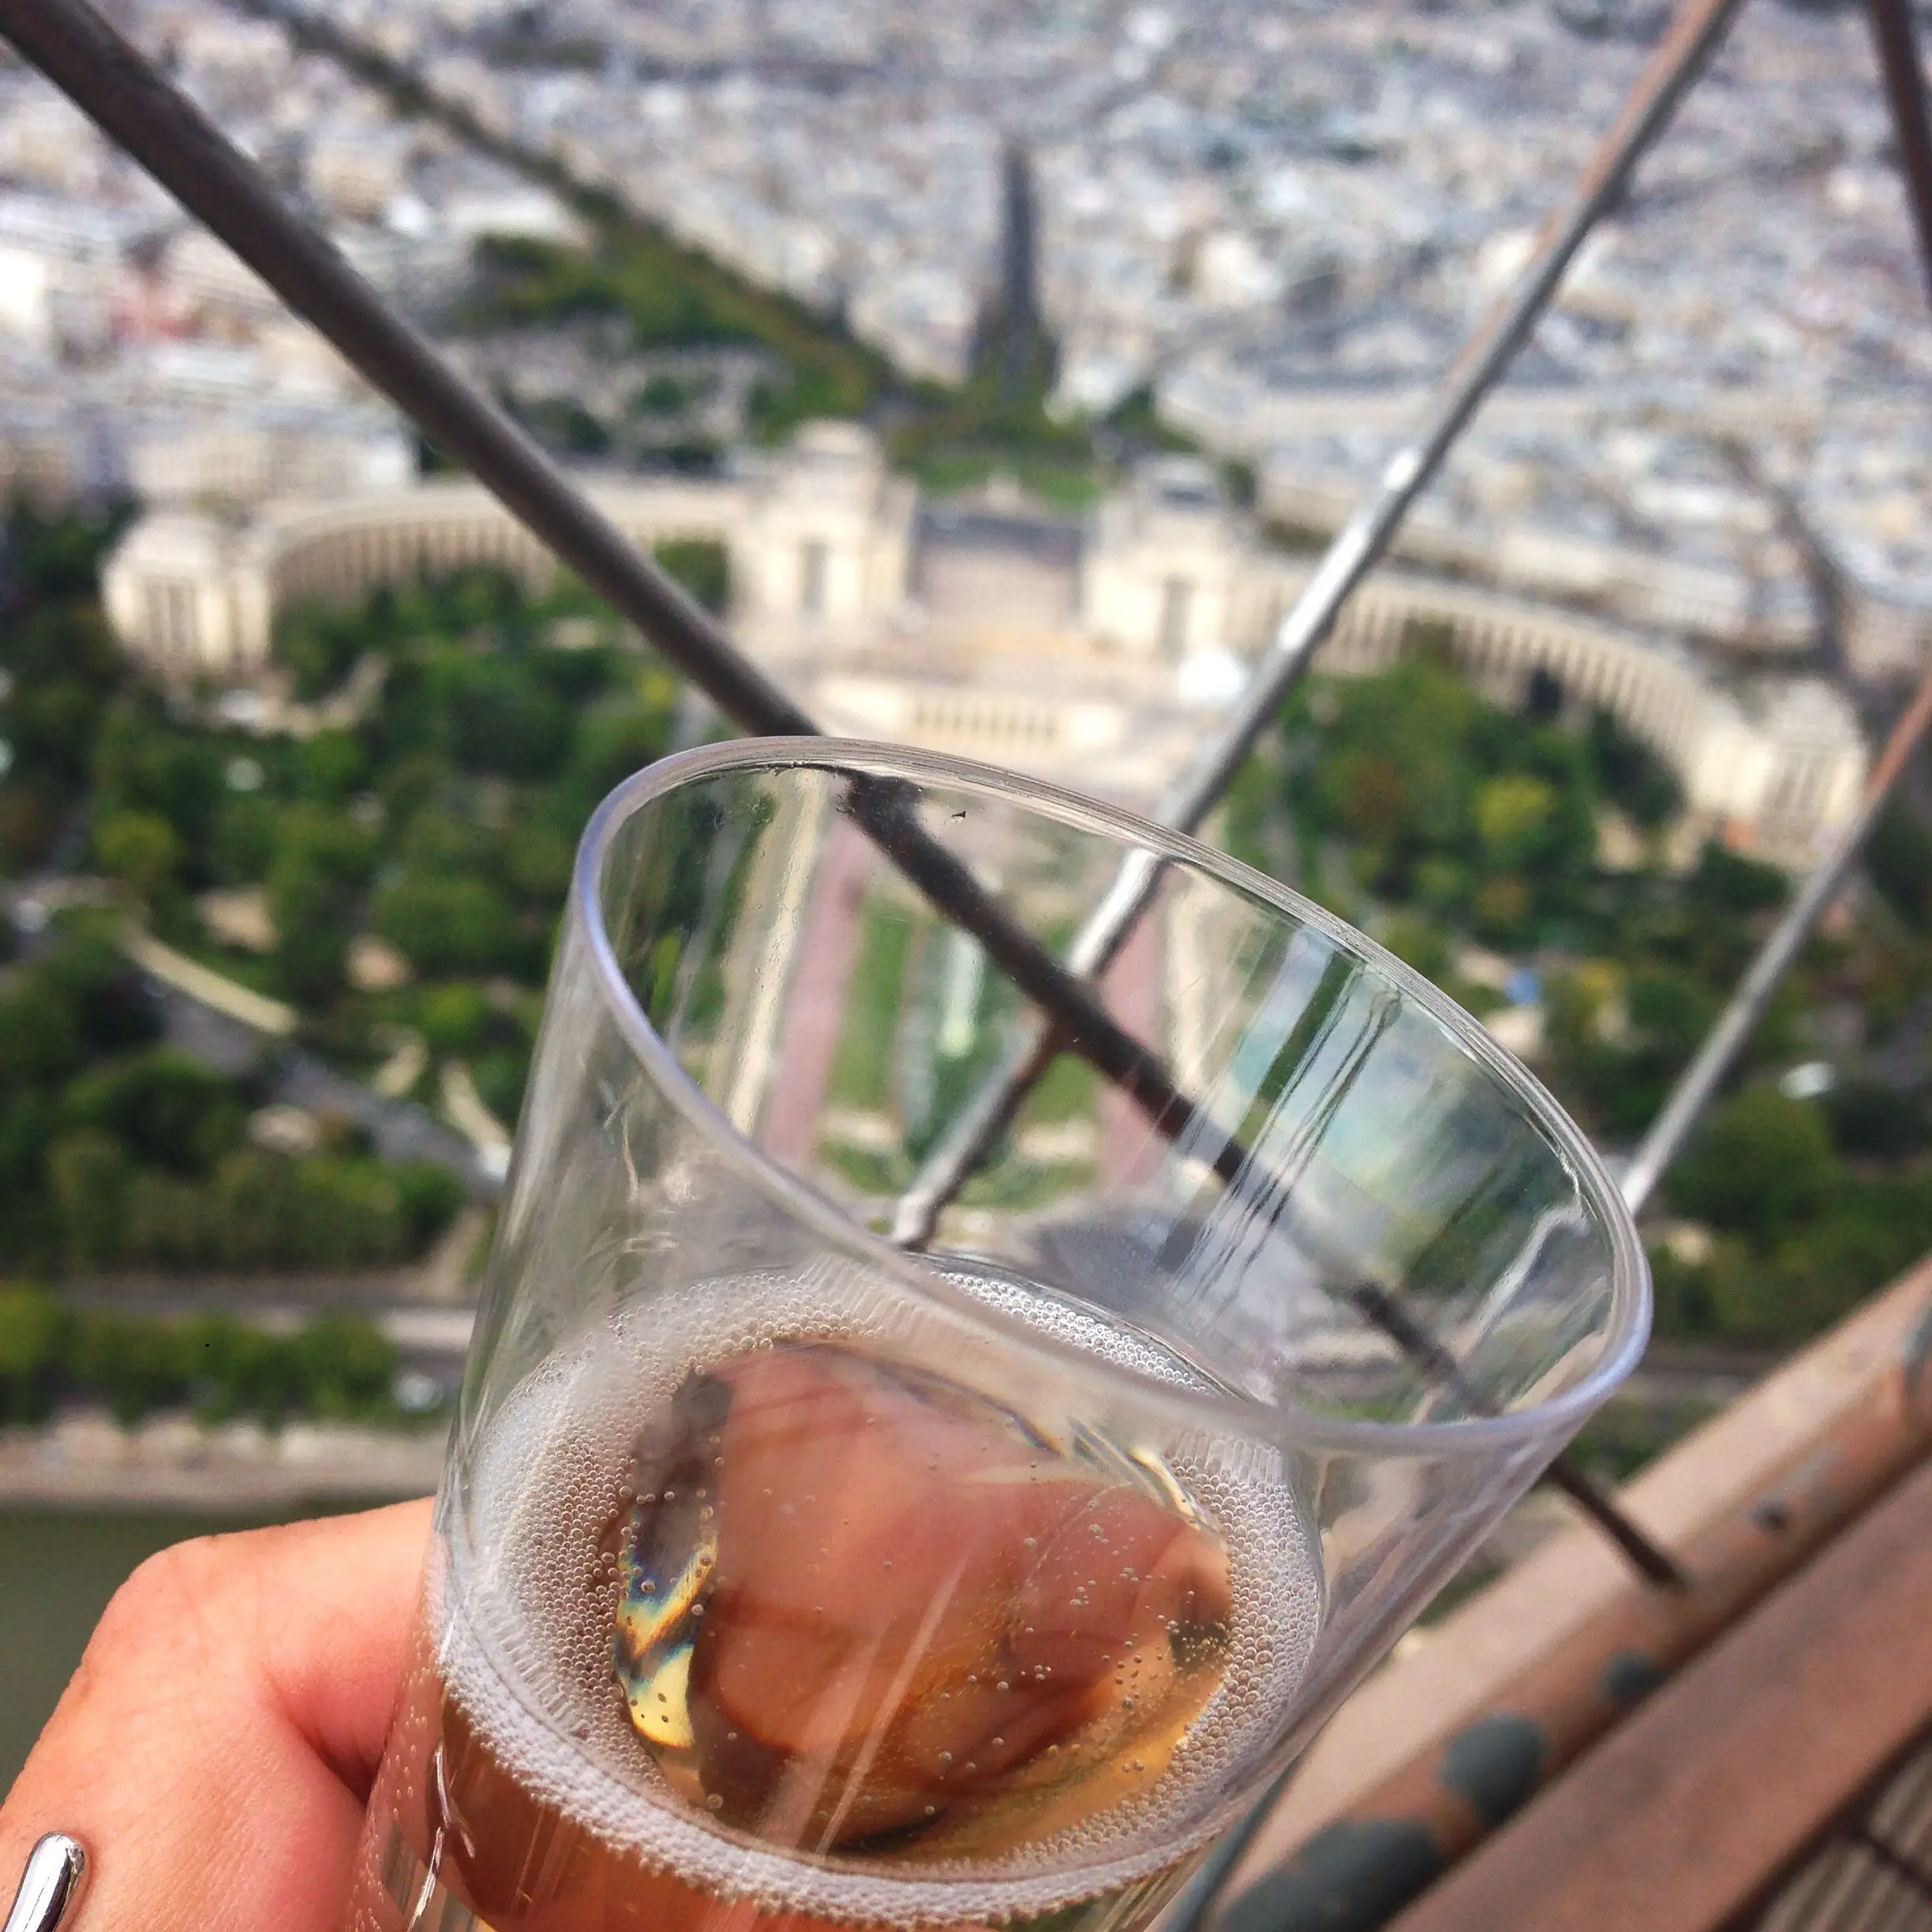 Champagne on top of the Eiffel Tower #paris2014